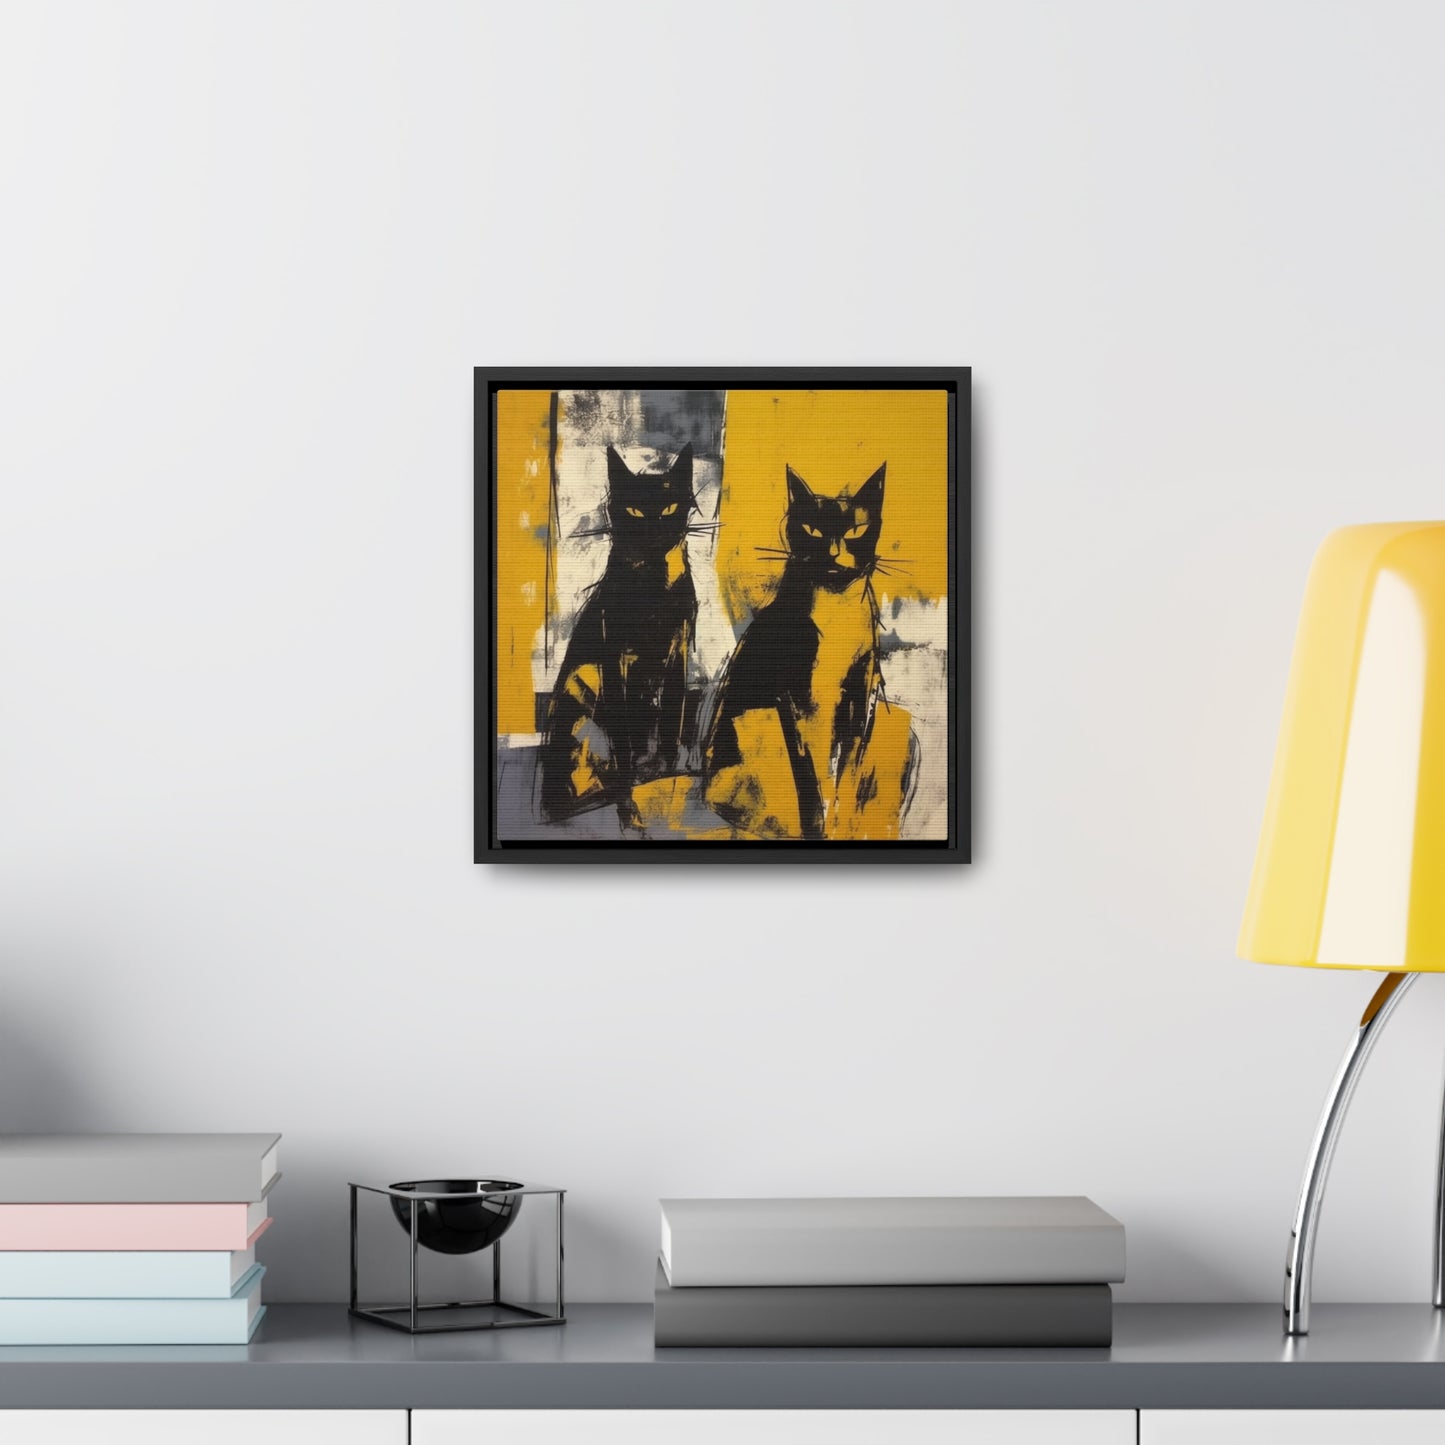 Cat 23, Gallery Canvas Wraps, Square Frame